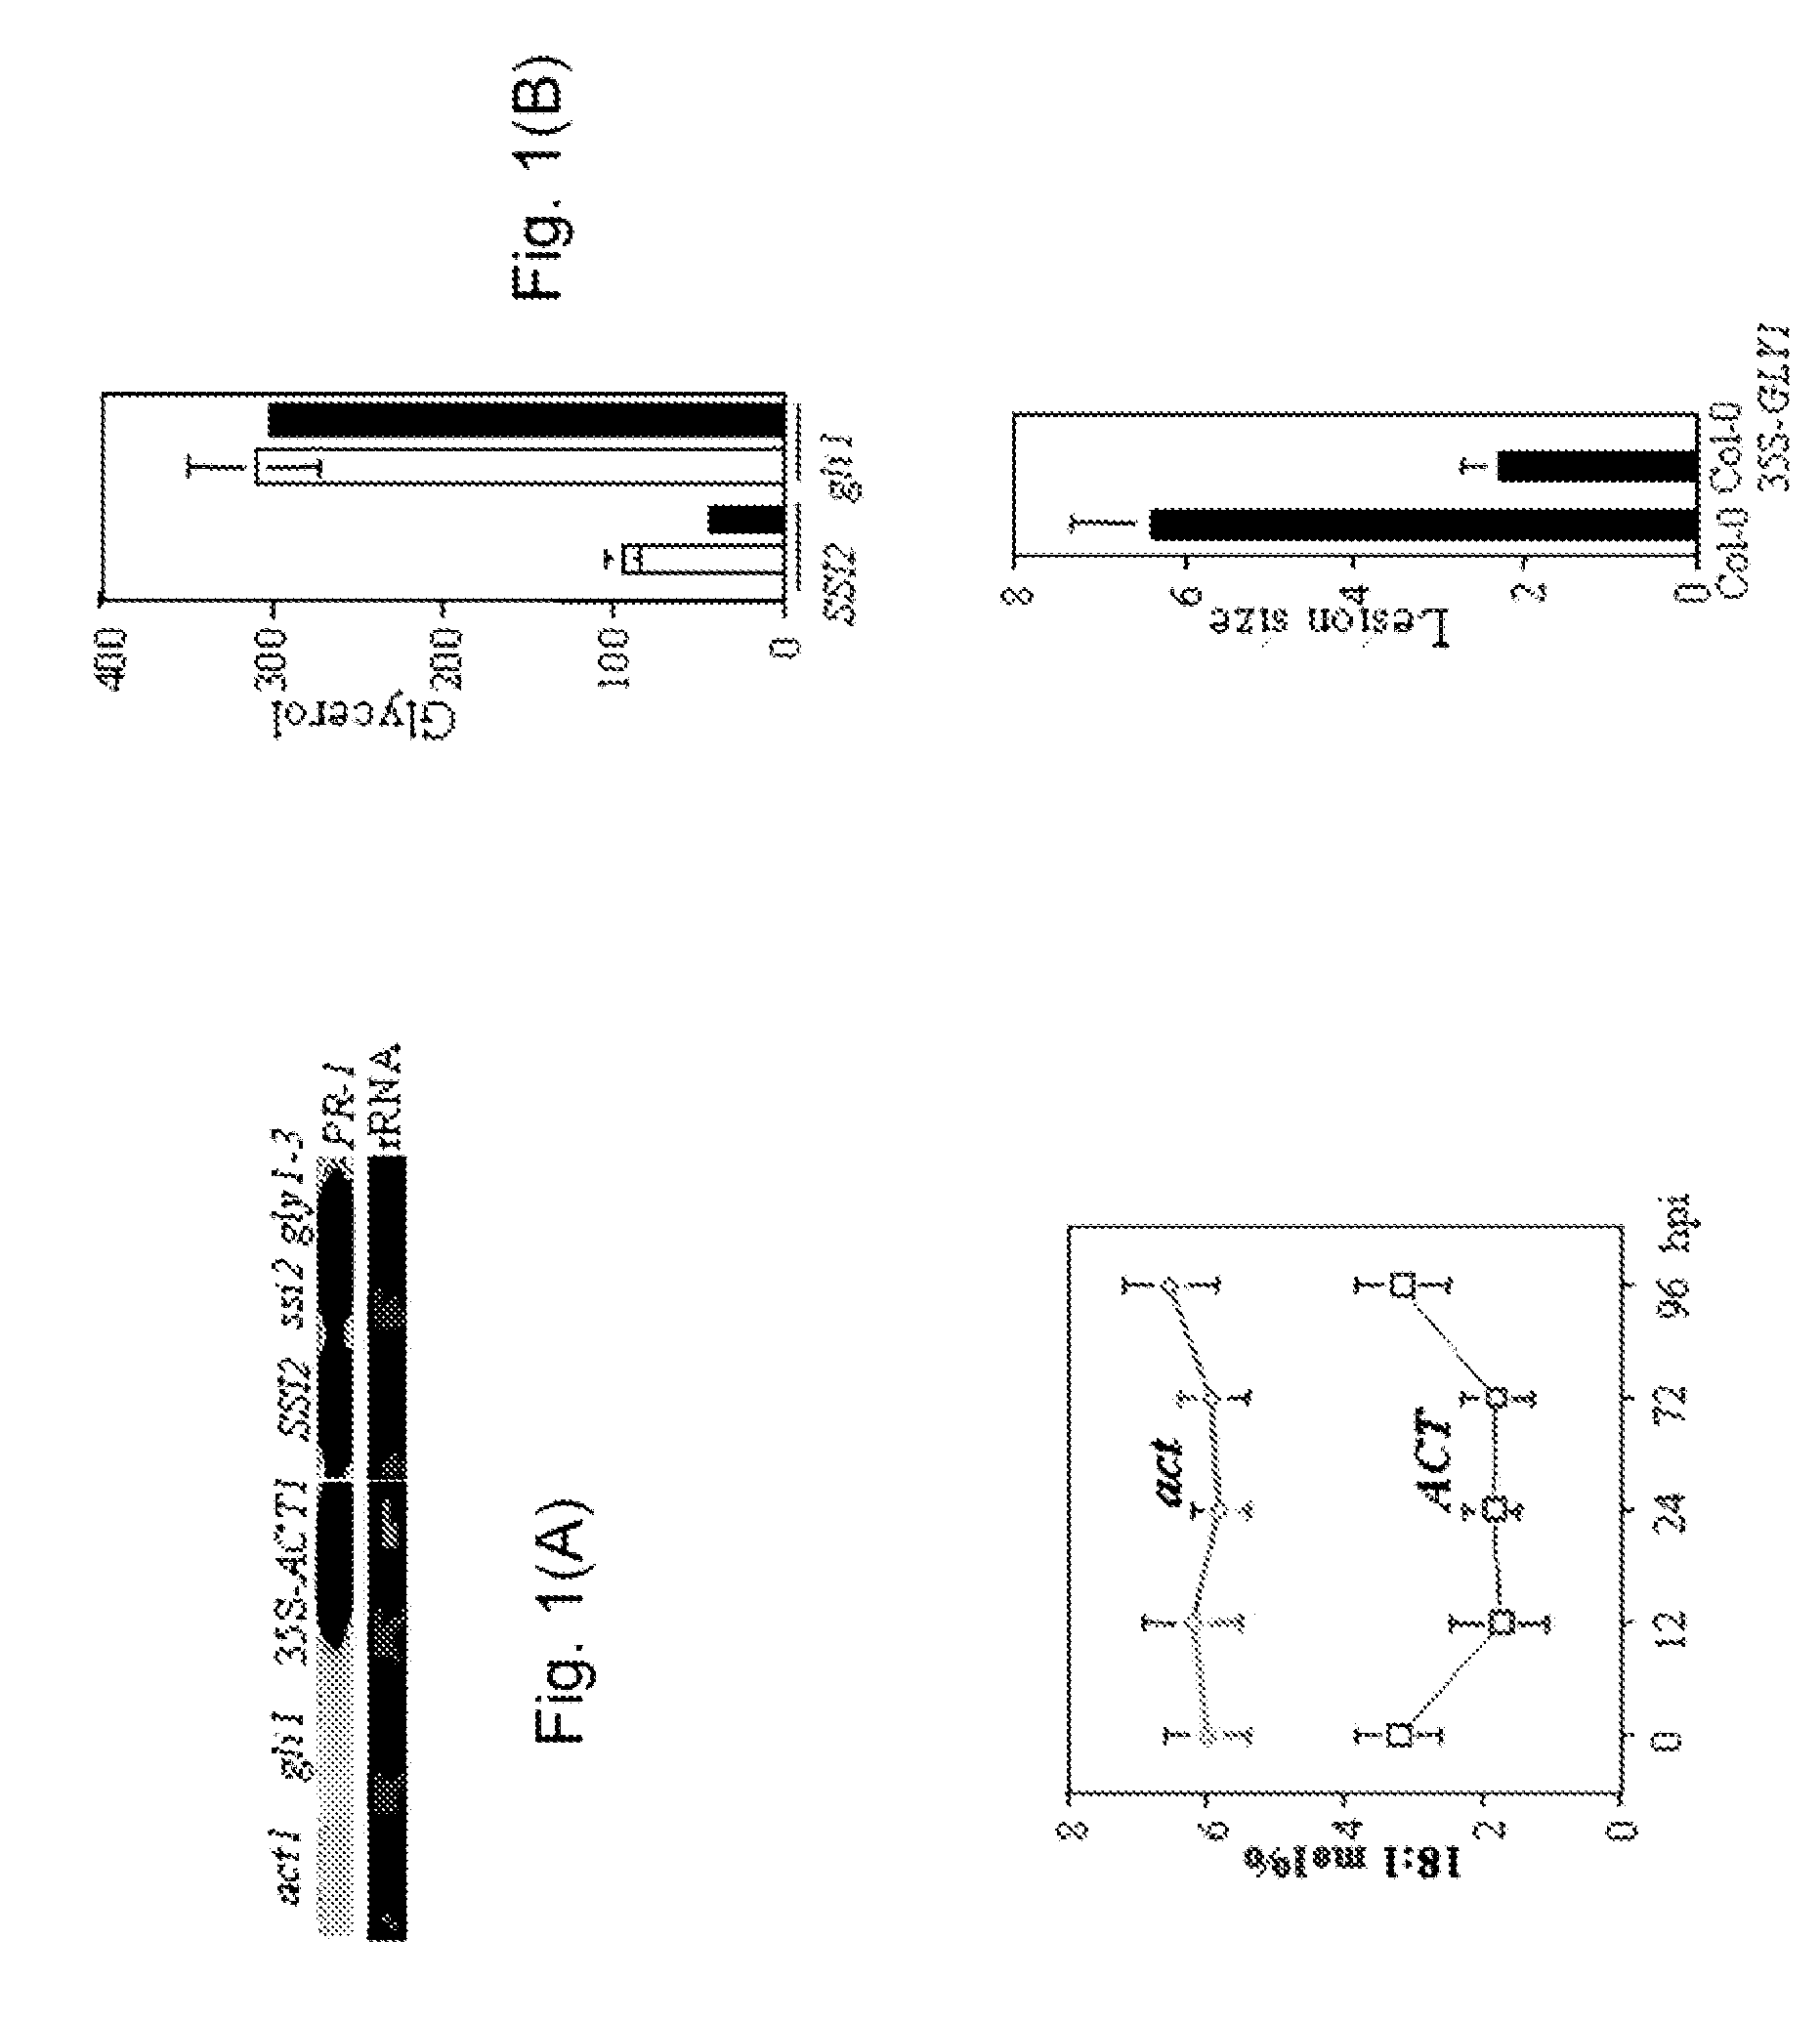 Plants having an enhanced resistance to necrotrophic pathogens and method of making same